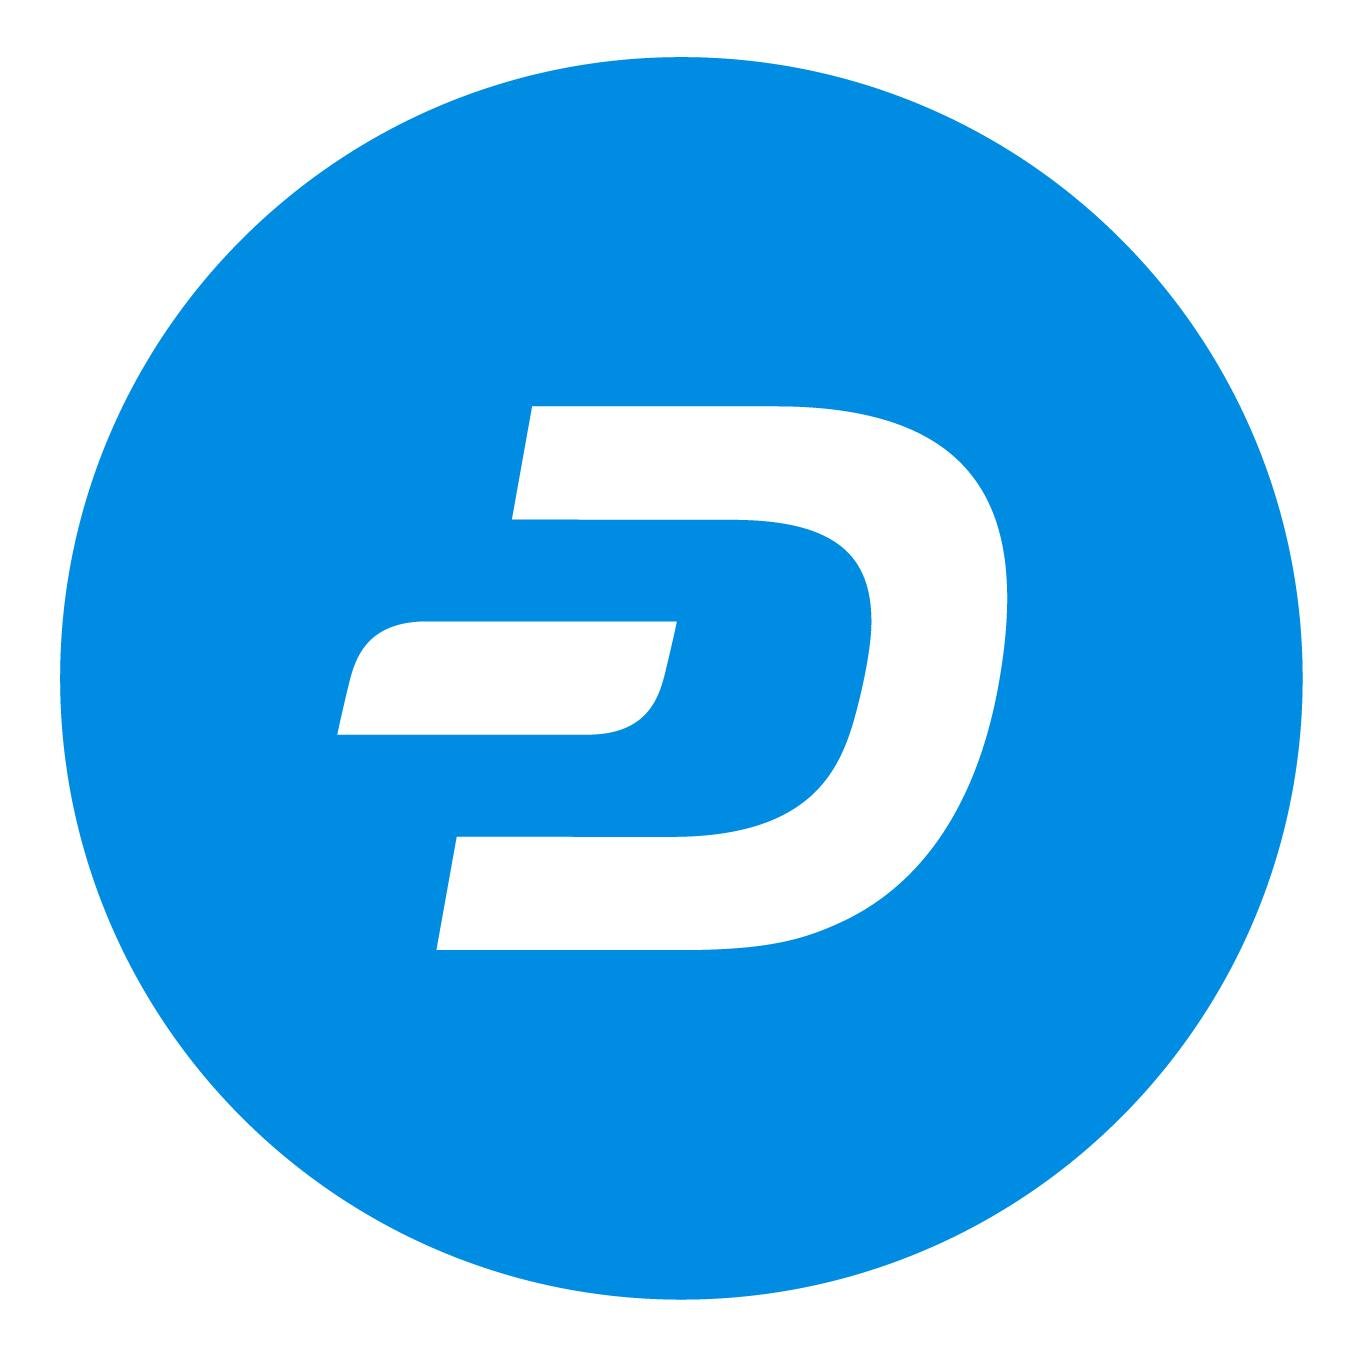 The BuildWithDash Program offers marketing and technical support to blockchain developers working on dApps. 

Telegram Support : https://t.co/YXA2EbsyhJ